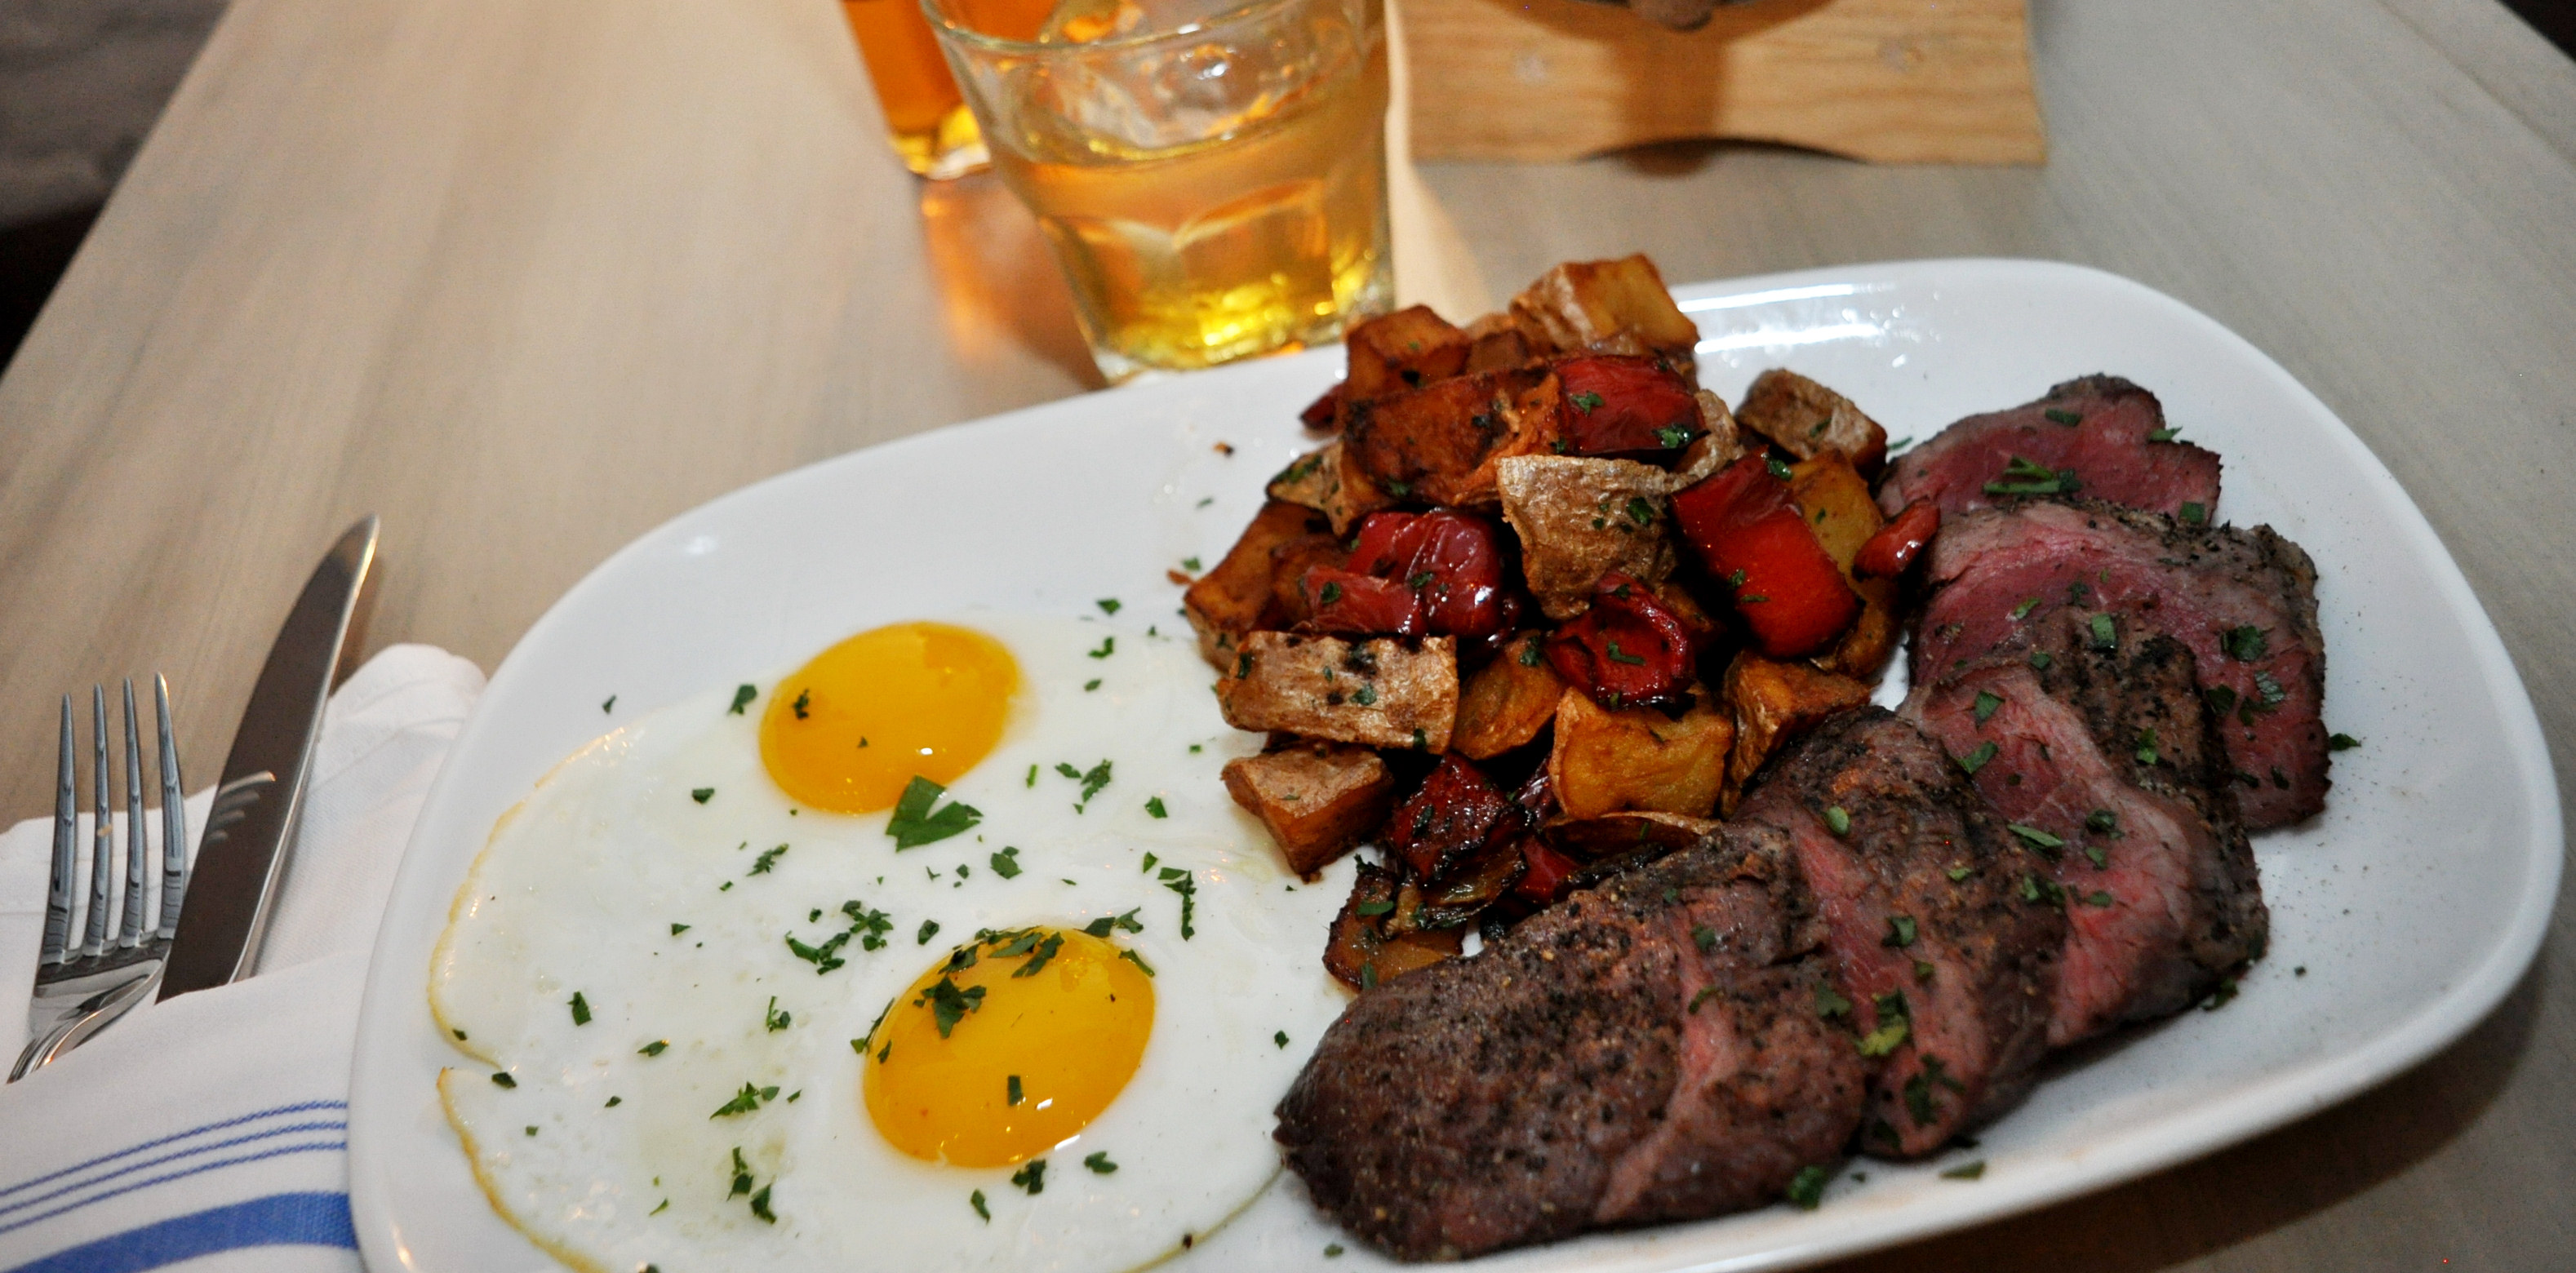 Steak and eggs with breakfast potatoes from Second State's Sunday brunch menu. (Photo: Second State)